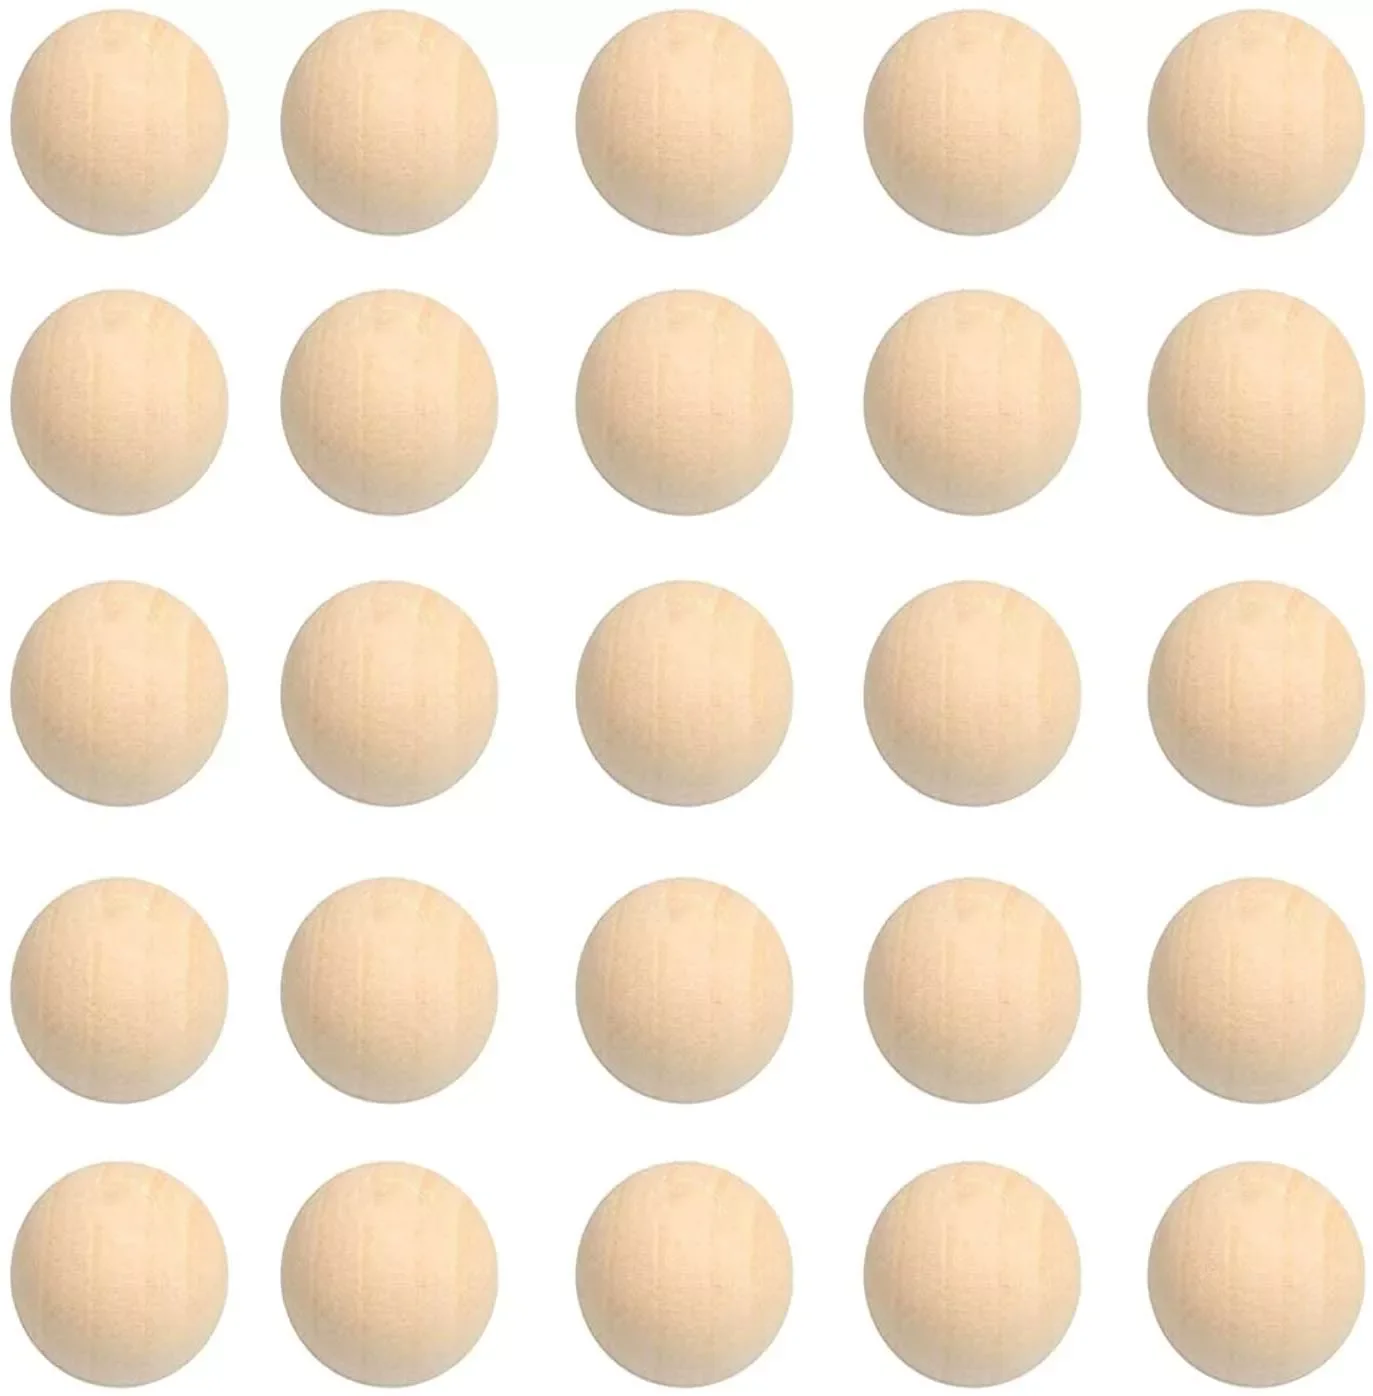 

15/20/25/30/35/40mm Hardwood Balls Natural Unfinished Round Wooden Ball for Balls Crafts and DIY Projects 1-20pcs